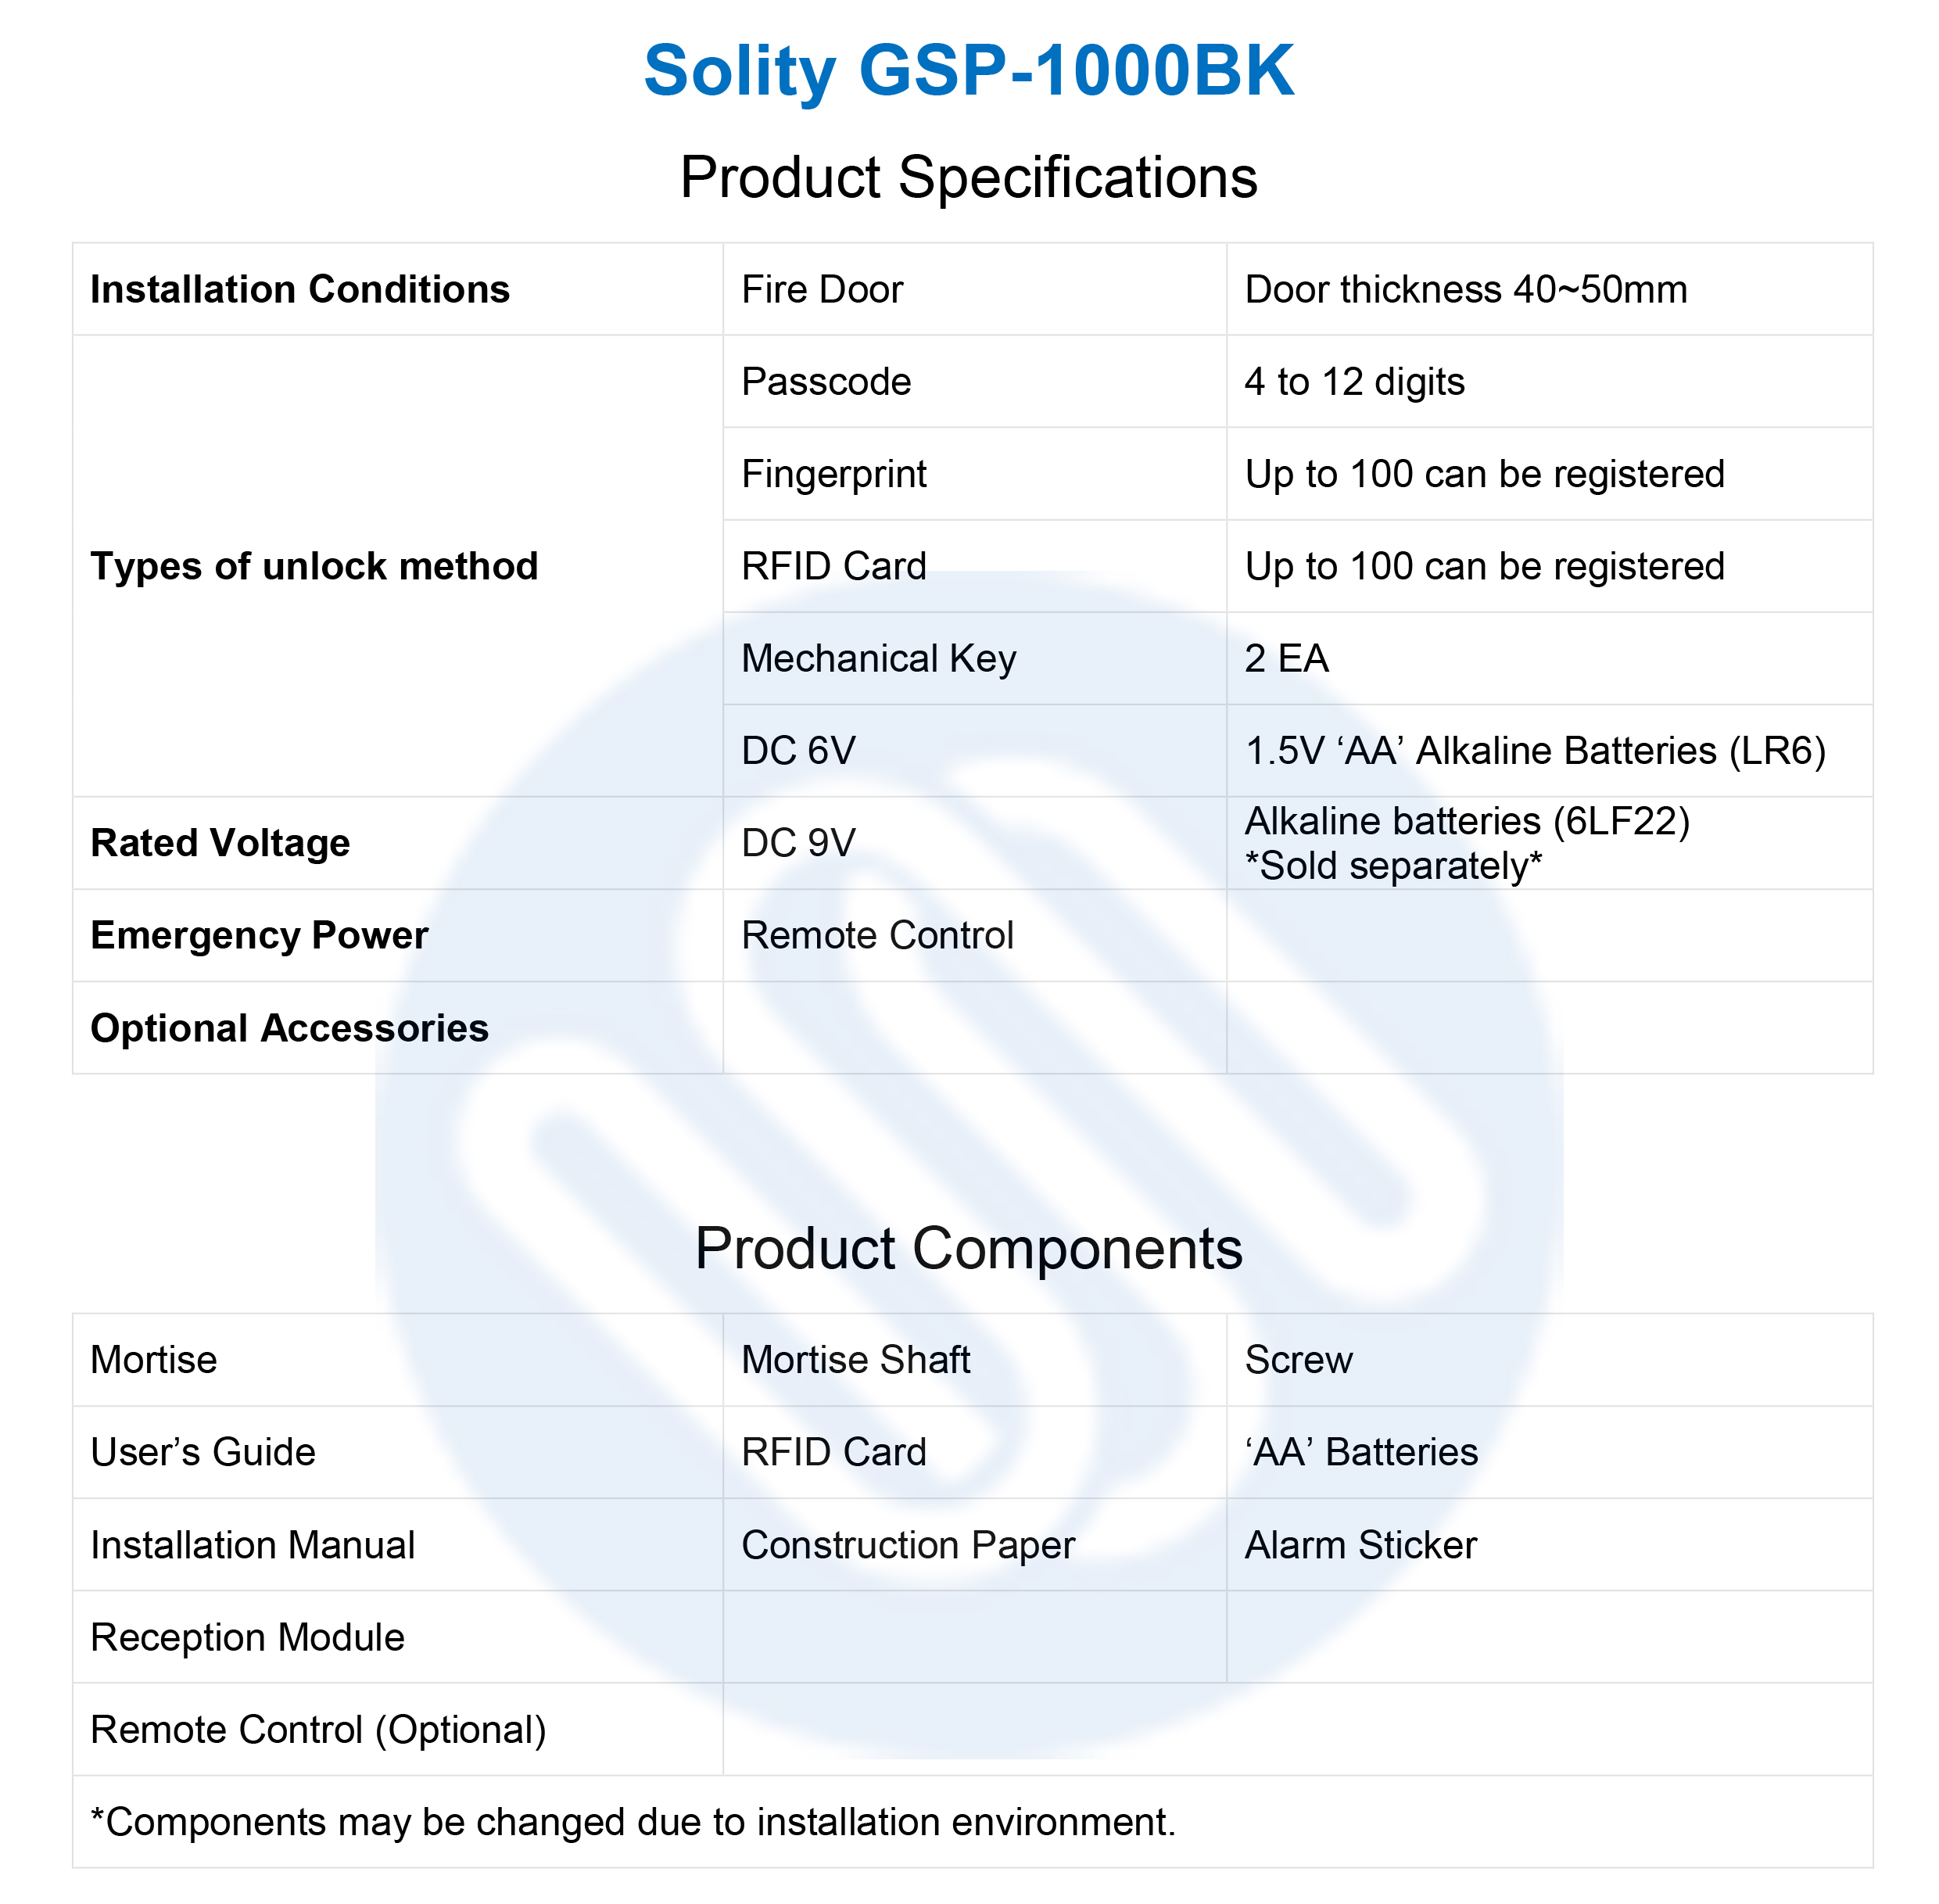 SOLITY GSP-1000BK Product Specification